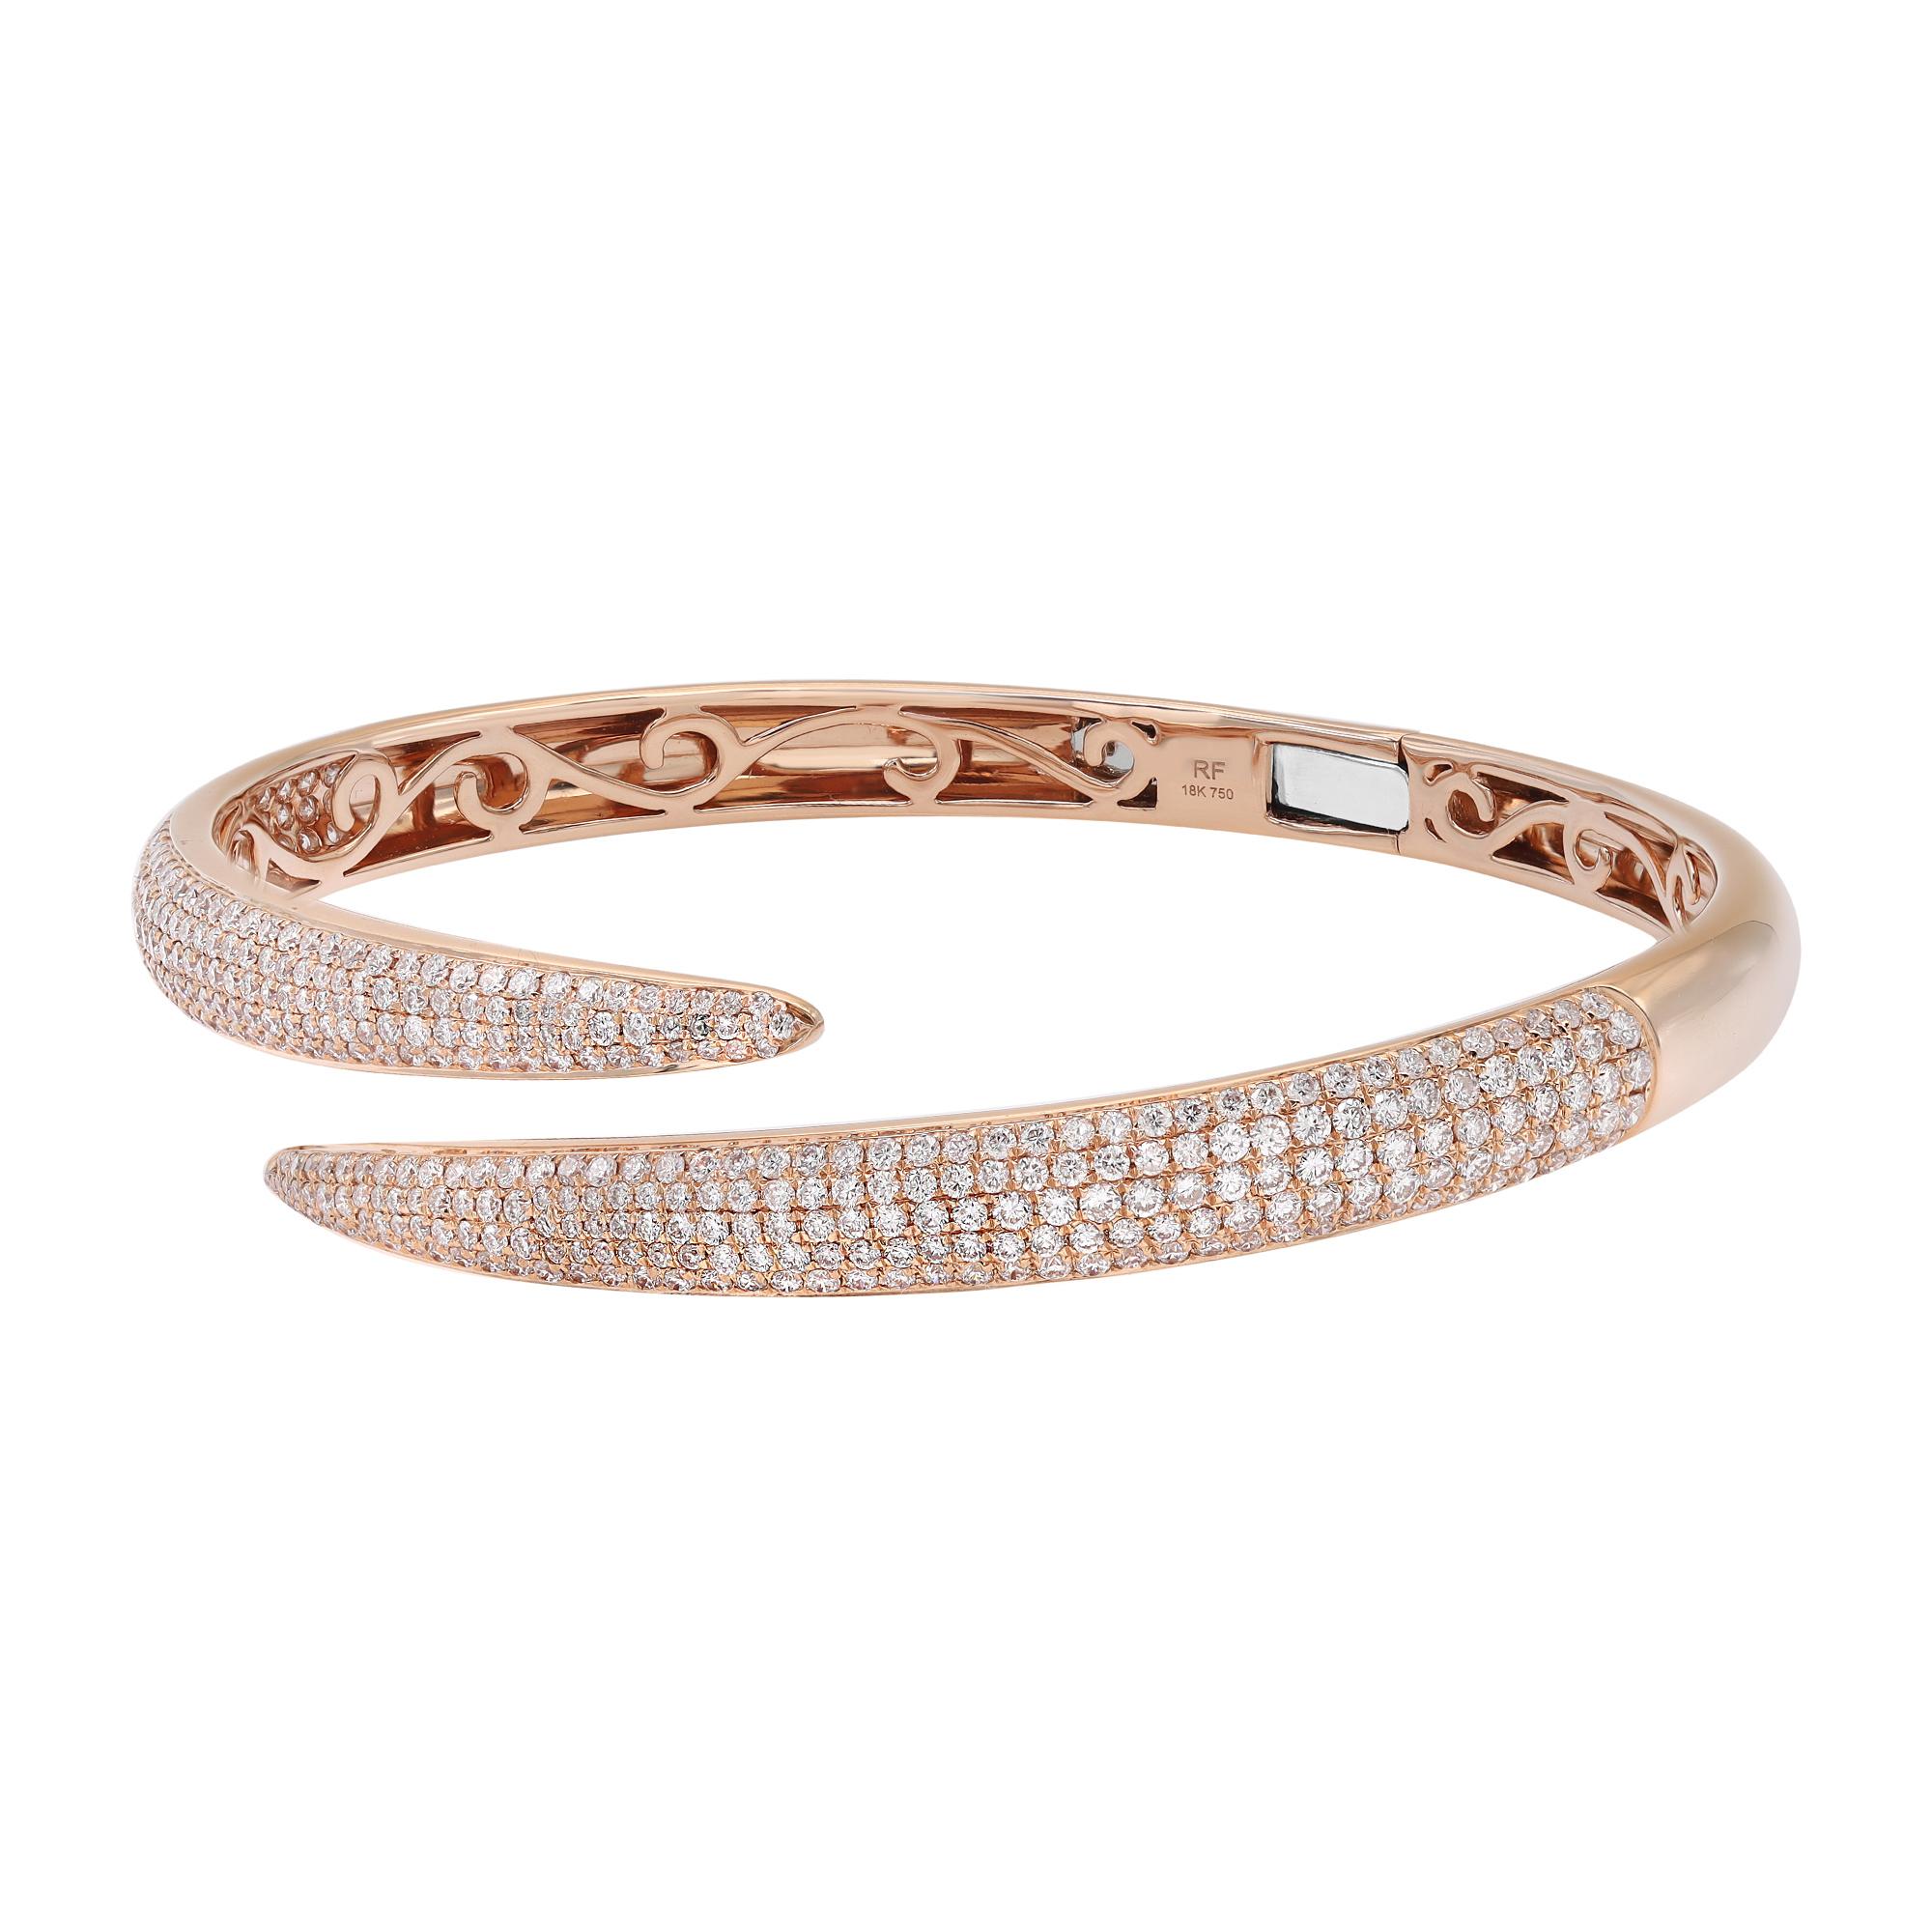 A classic look with easy elegance, this diamond bangle bracelet exudes sophistication. This stunning bracelet is crafted in 18k rose gold and features pave set tiny white round cut diamonds with a total weight of 2.68 carats. Diamond color G-H and